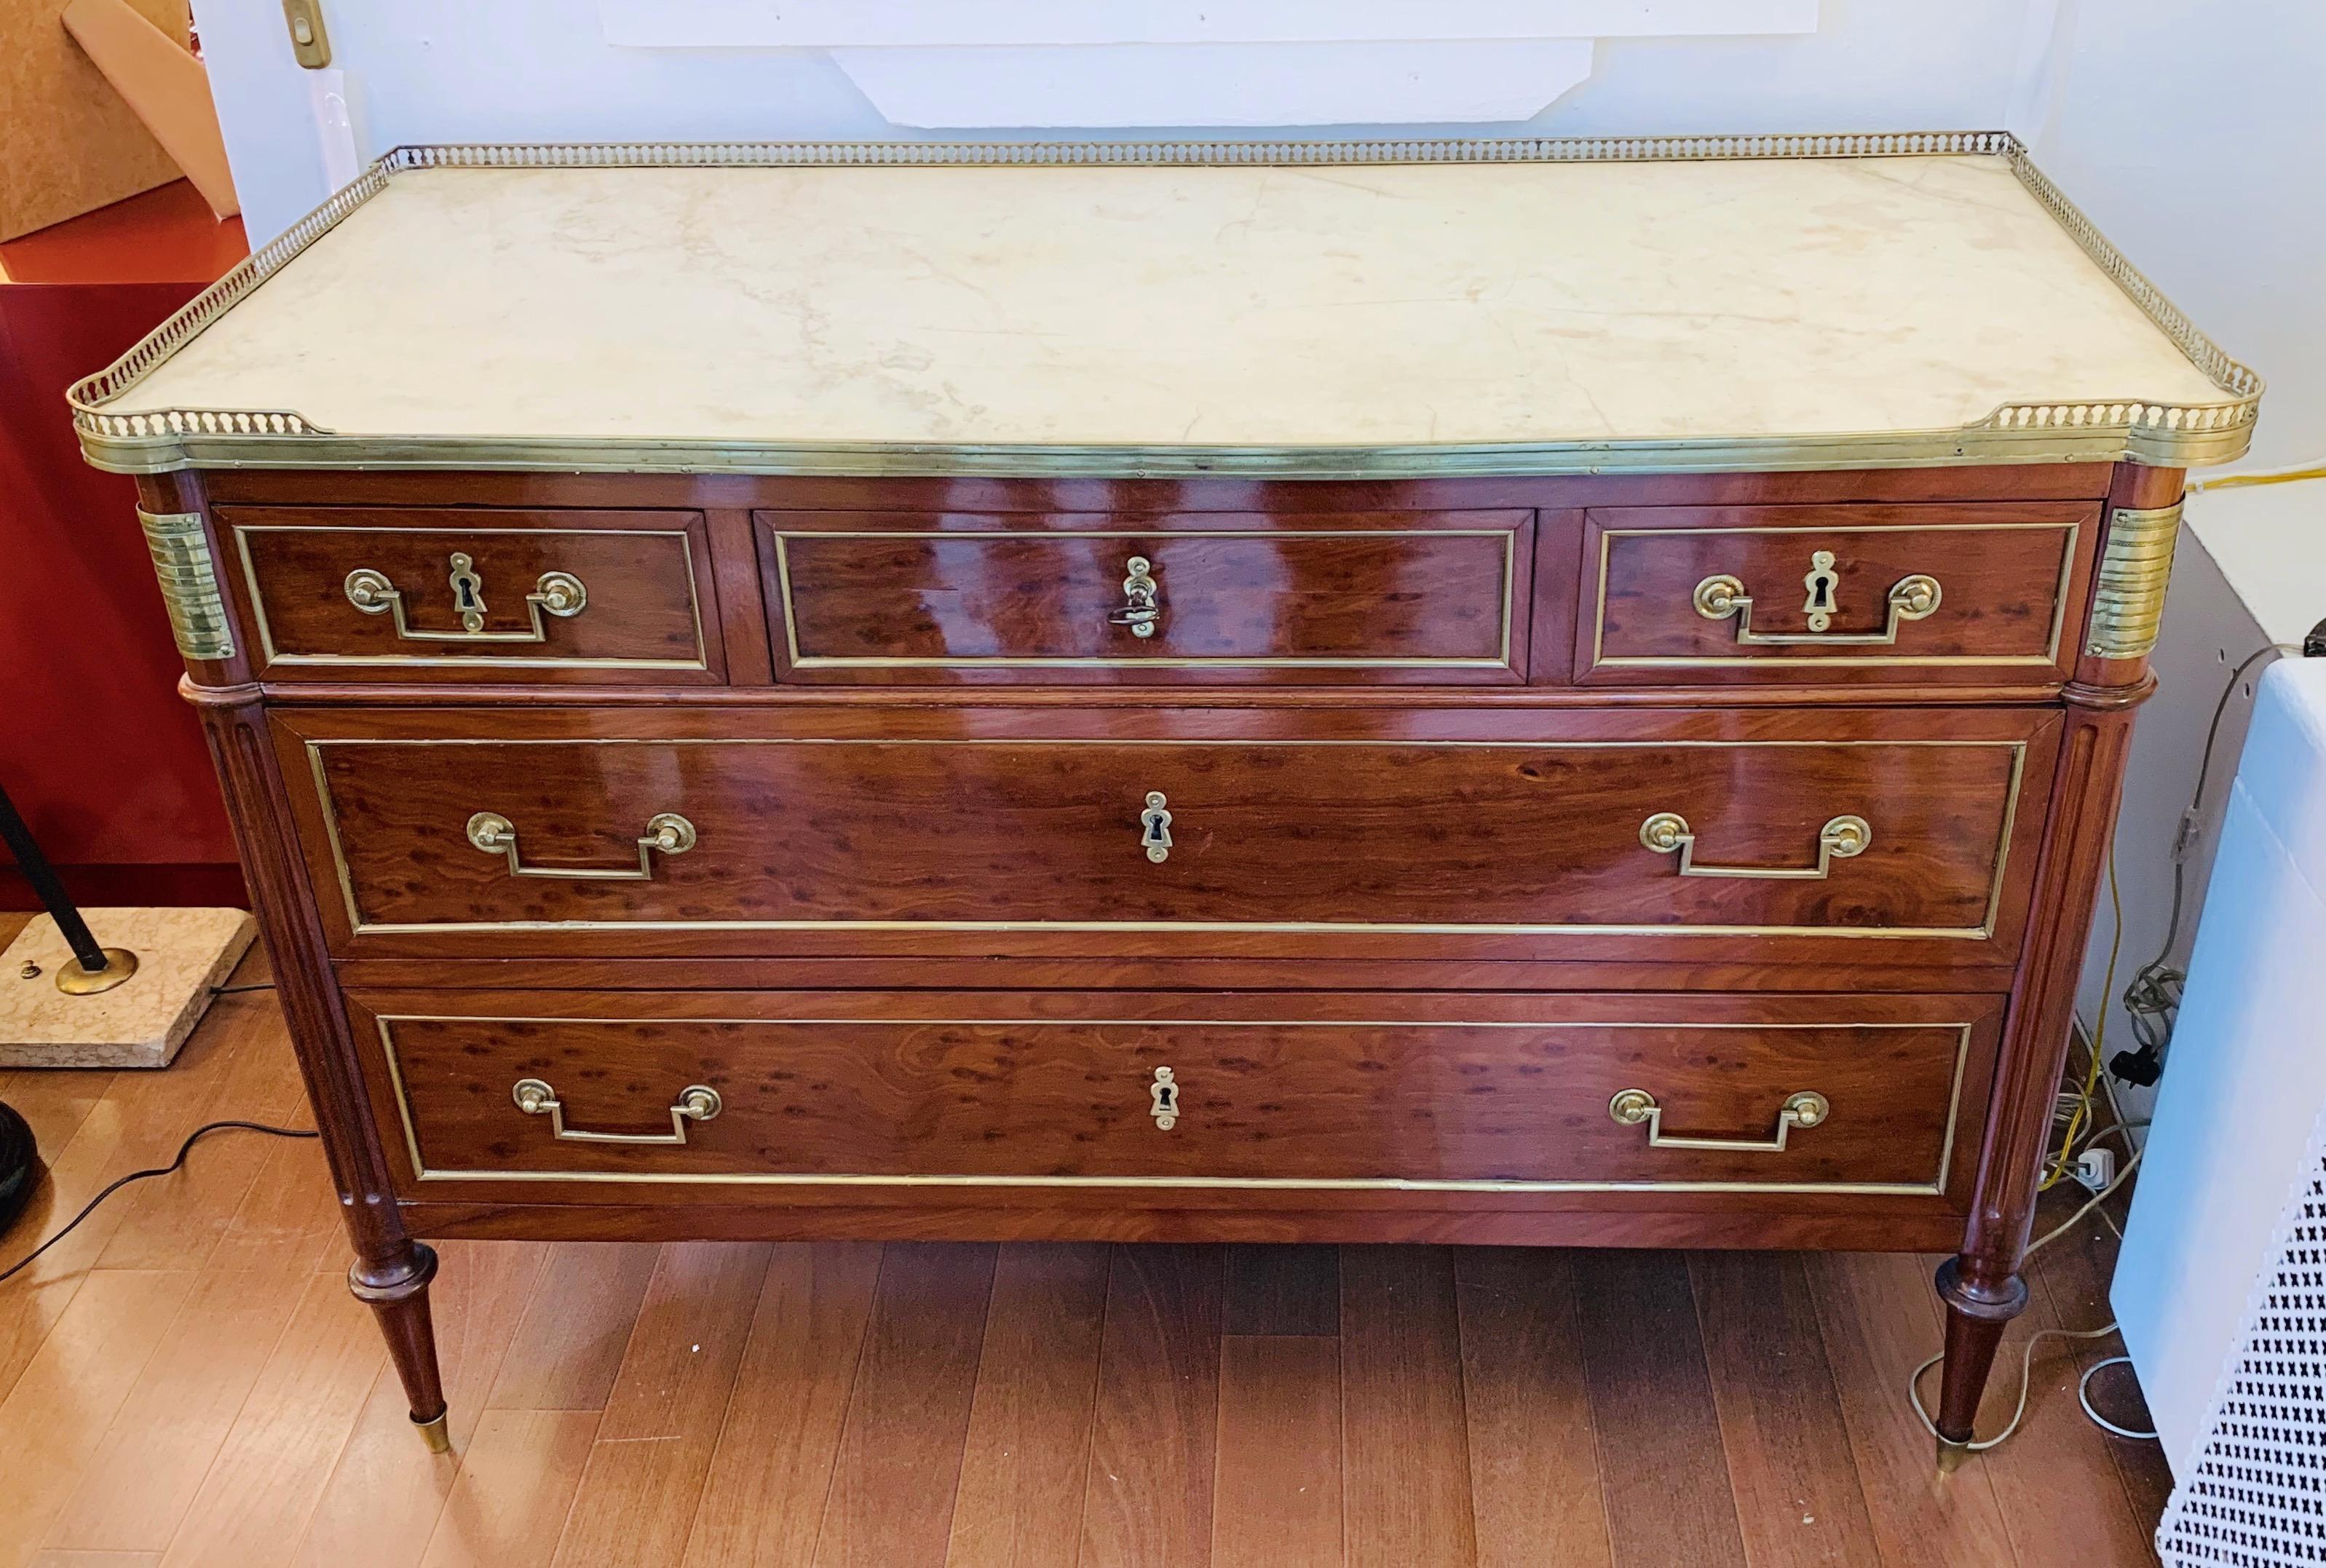 French Directoire chest of drawers, with galleried original top in gray veined white marble, decorated with brass stringing lines and moldings at the feet as well as chased brass plaques on the rounded corners, circa 1795- 1810. A special Empire